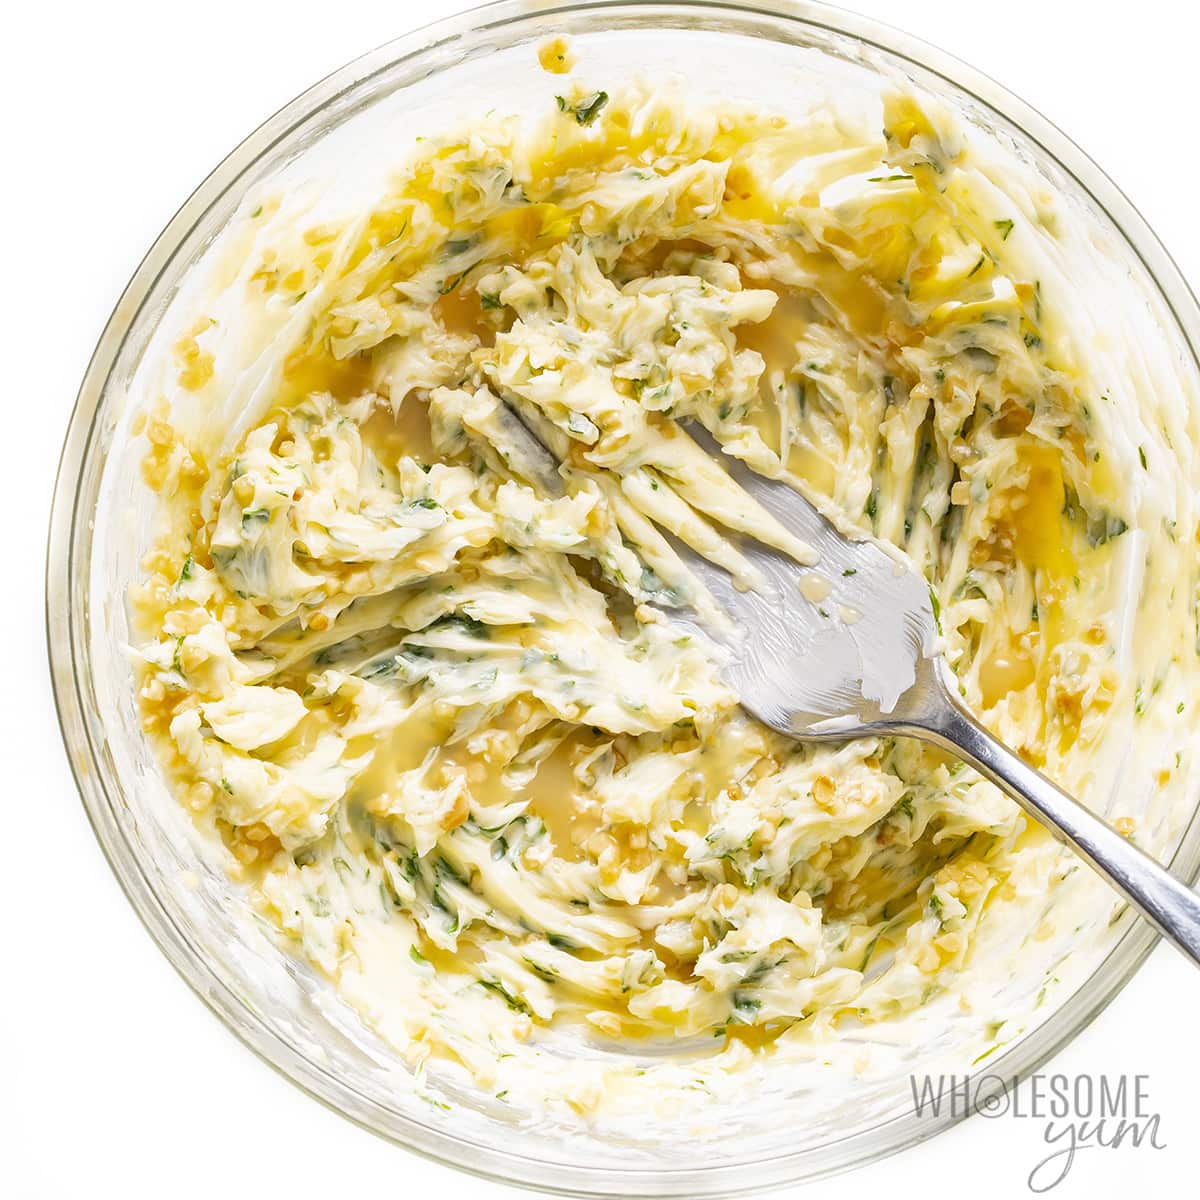 Herb butter for frying salmon.